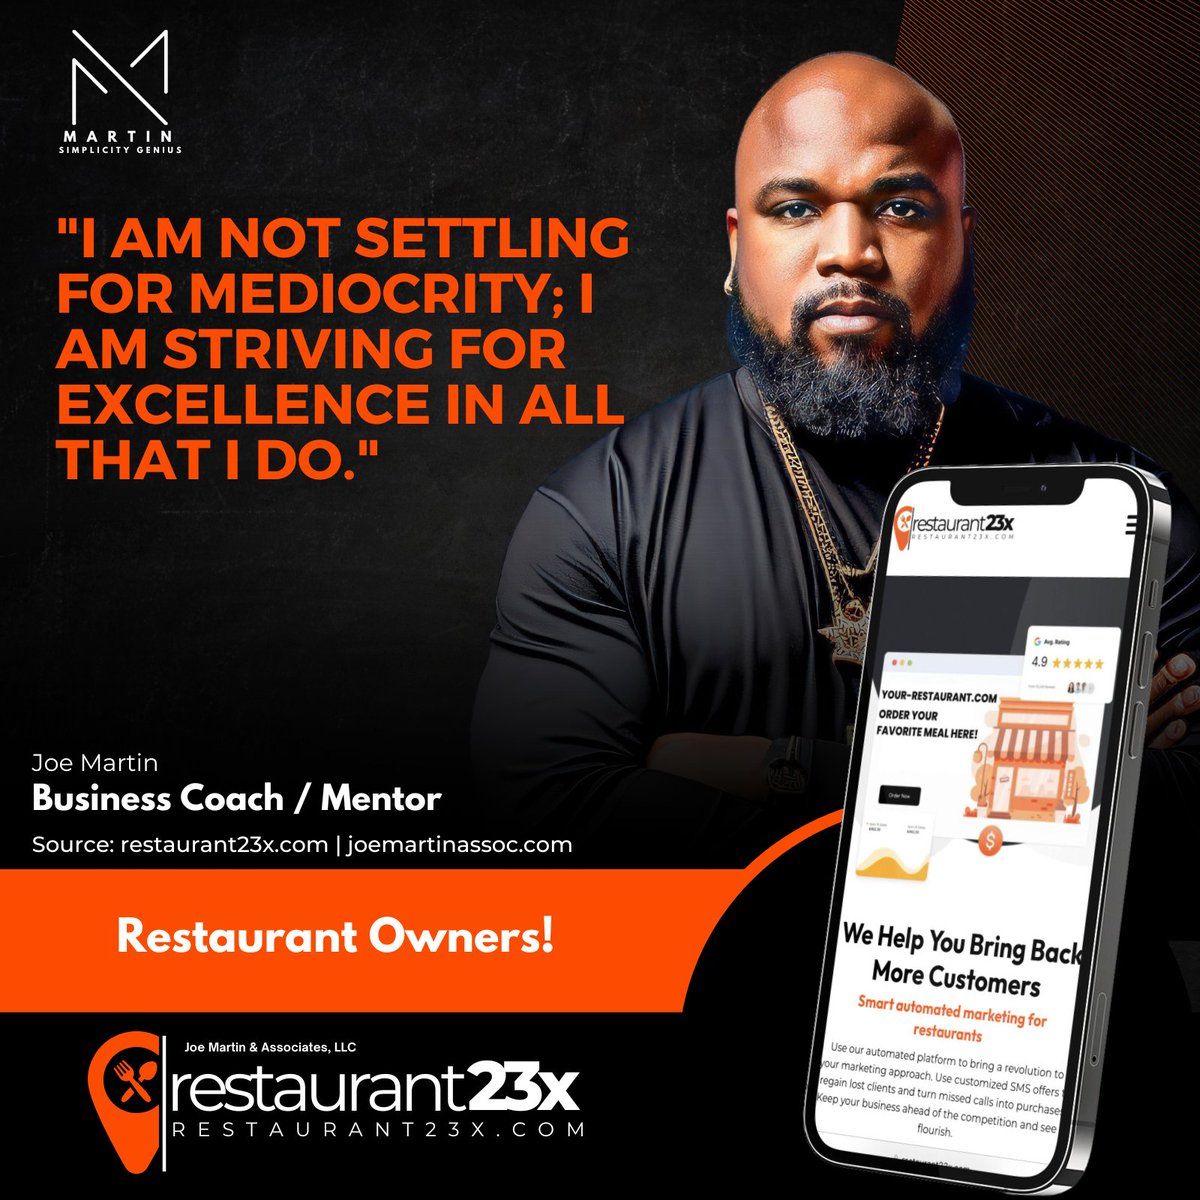 'Mediocrity has no place in my journey. 🌟 I'm committed to raising the bar and achieving excellence in every endeavor. #Restaurant23X #BusinessOwners #Entrepreneurs #Coach #Mentor #StriveForExcellence #NoMediocrity'